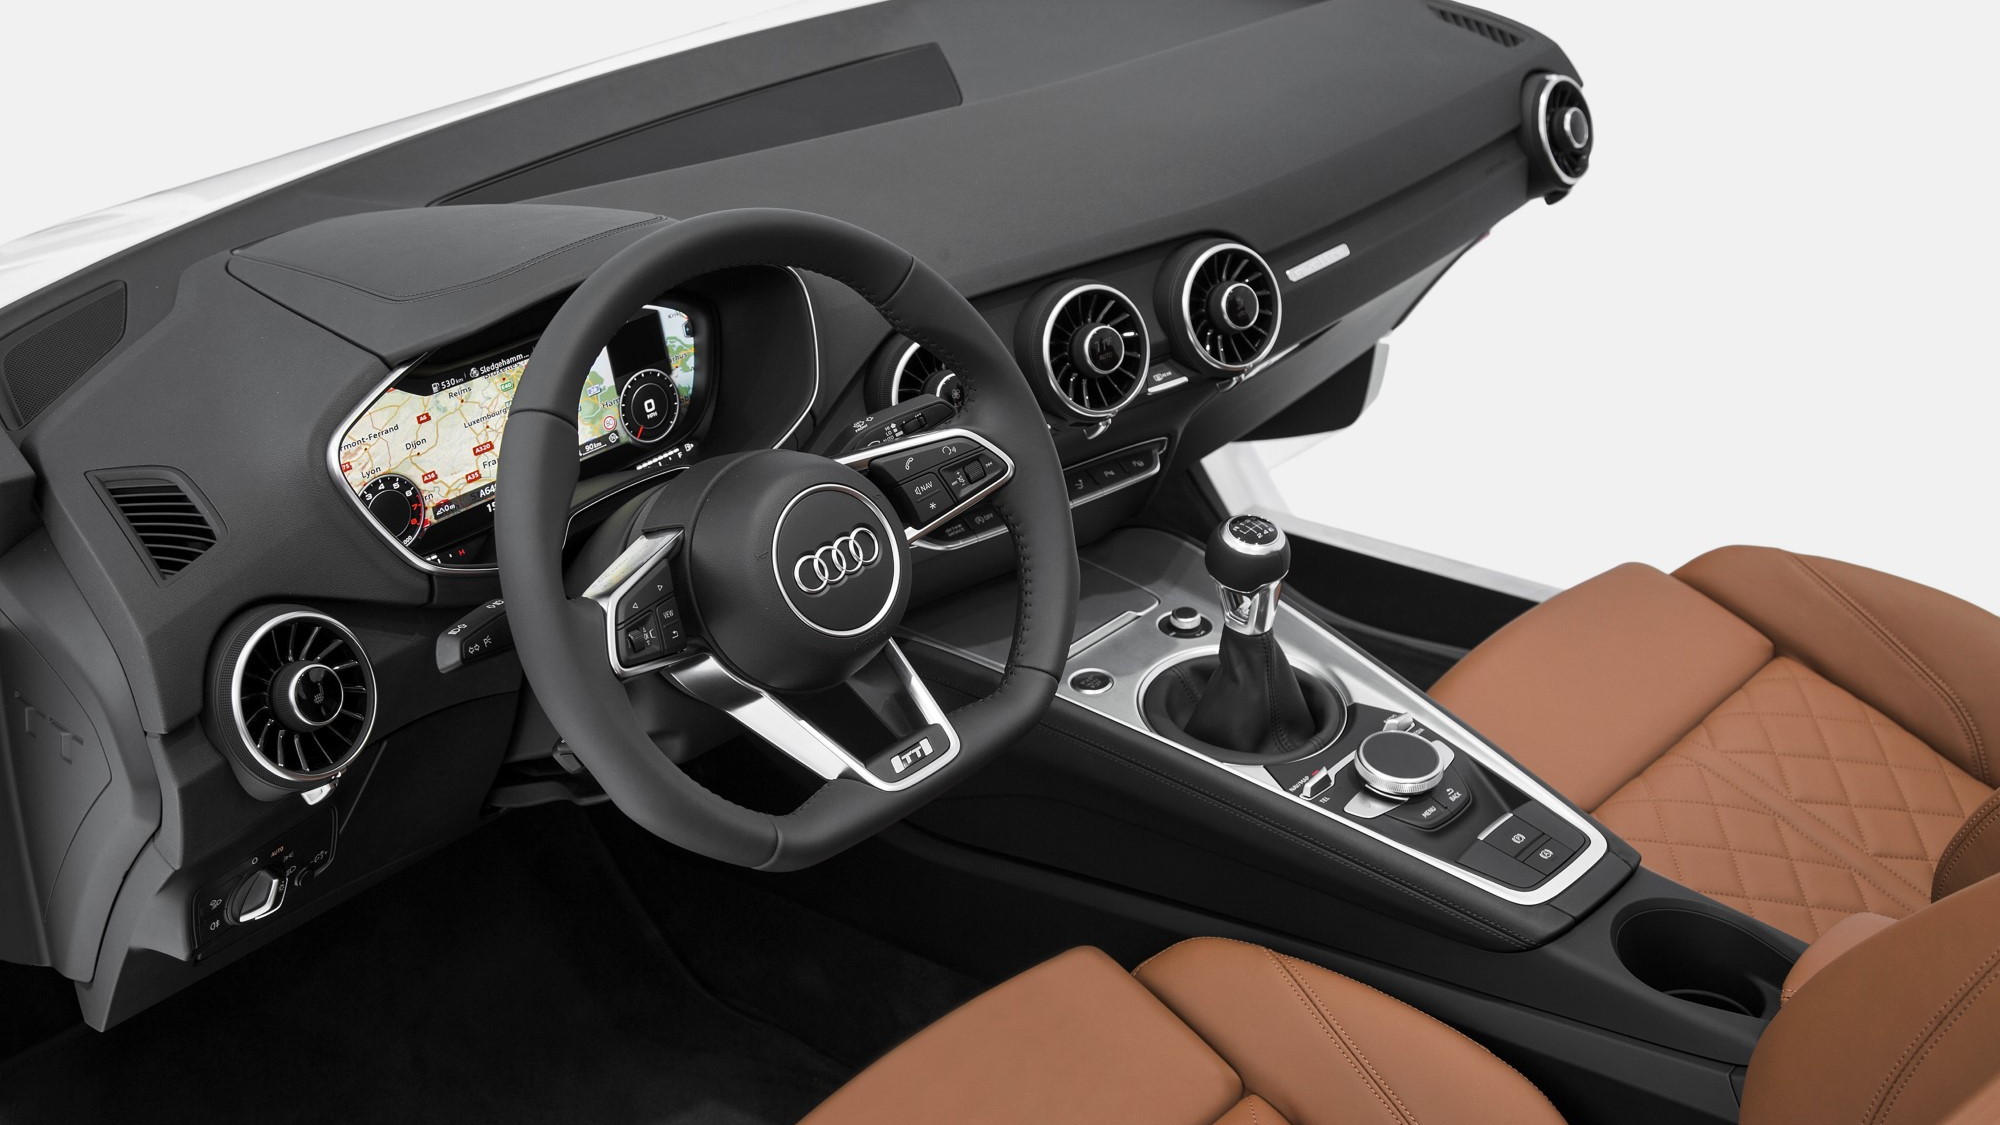 2015 Audi TT cabin previewed at CES